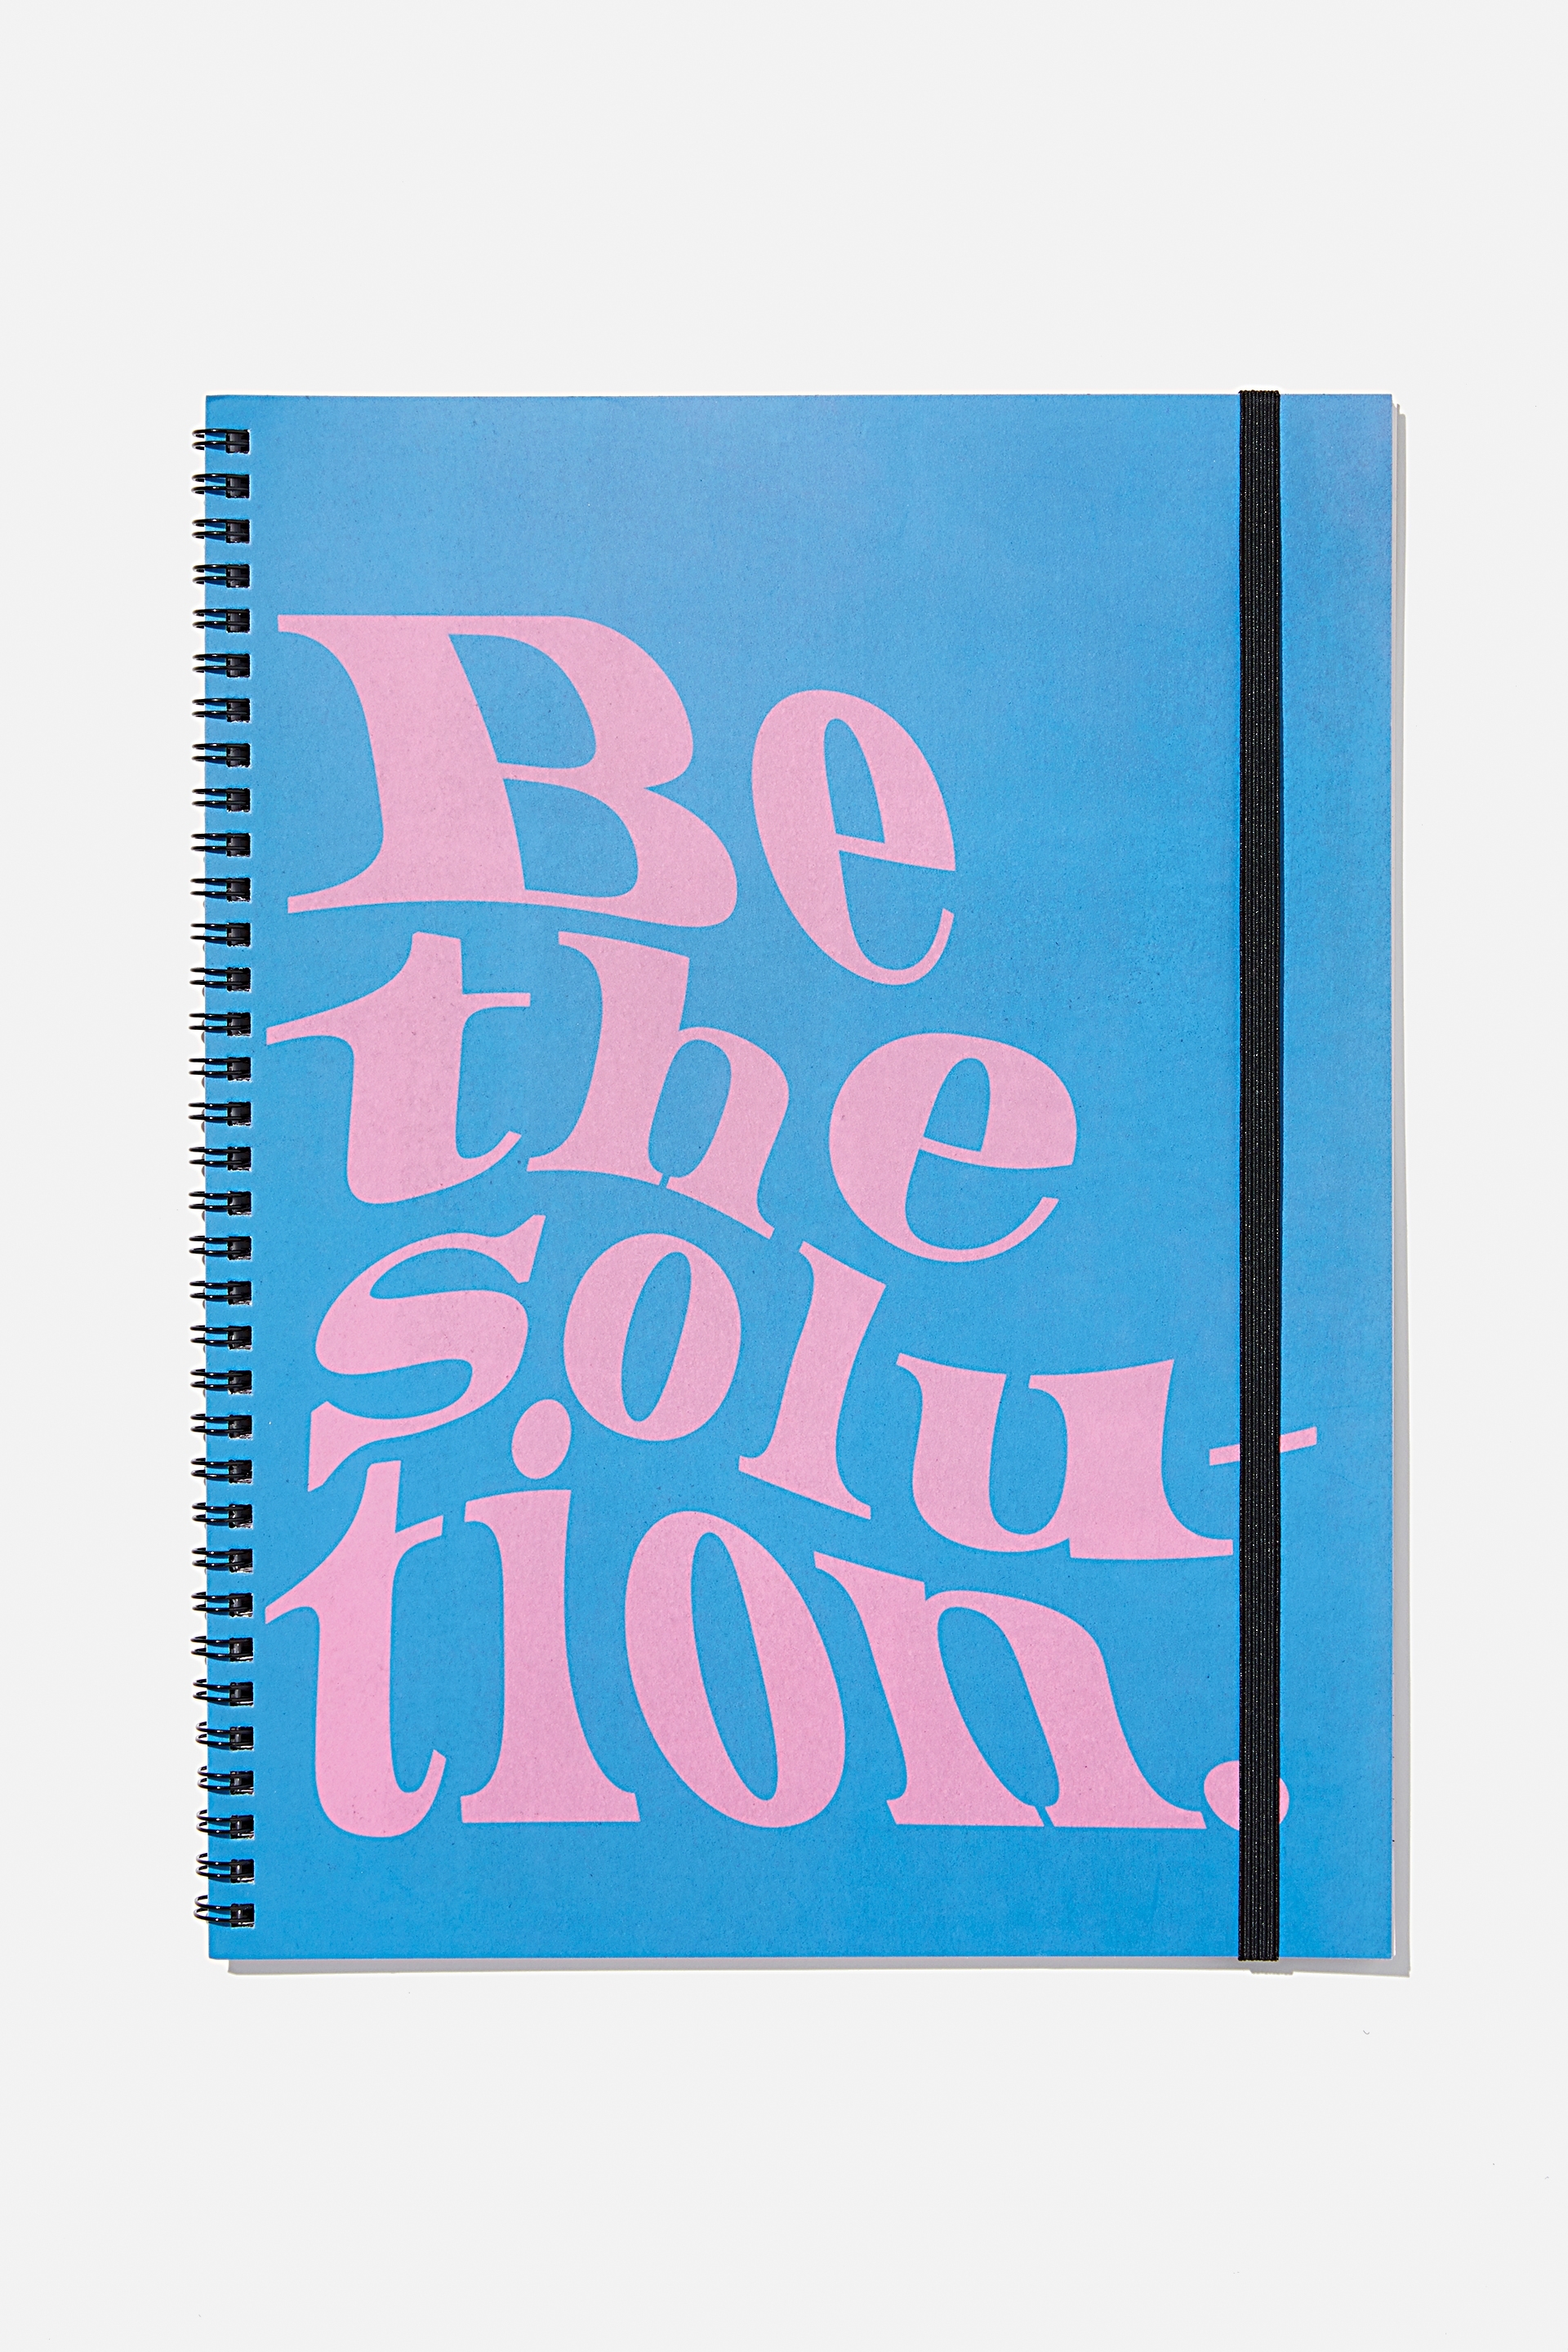 Typo - A4 Spinout Notebook Recycled - Be the solution